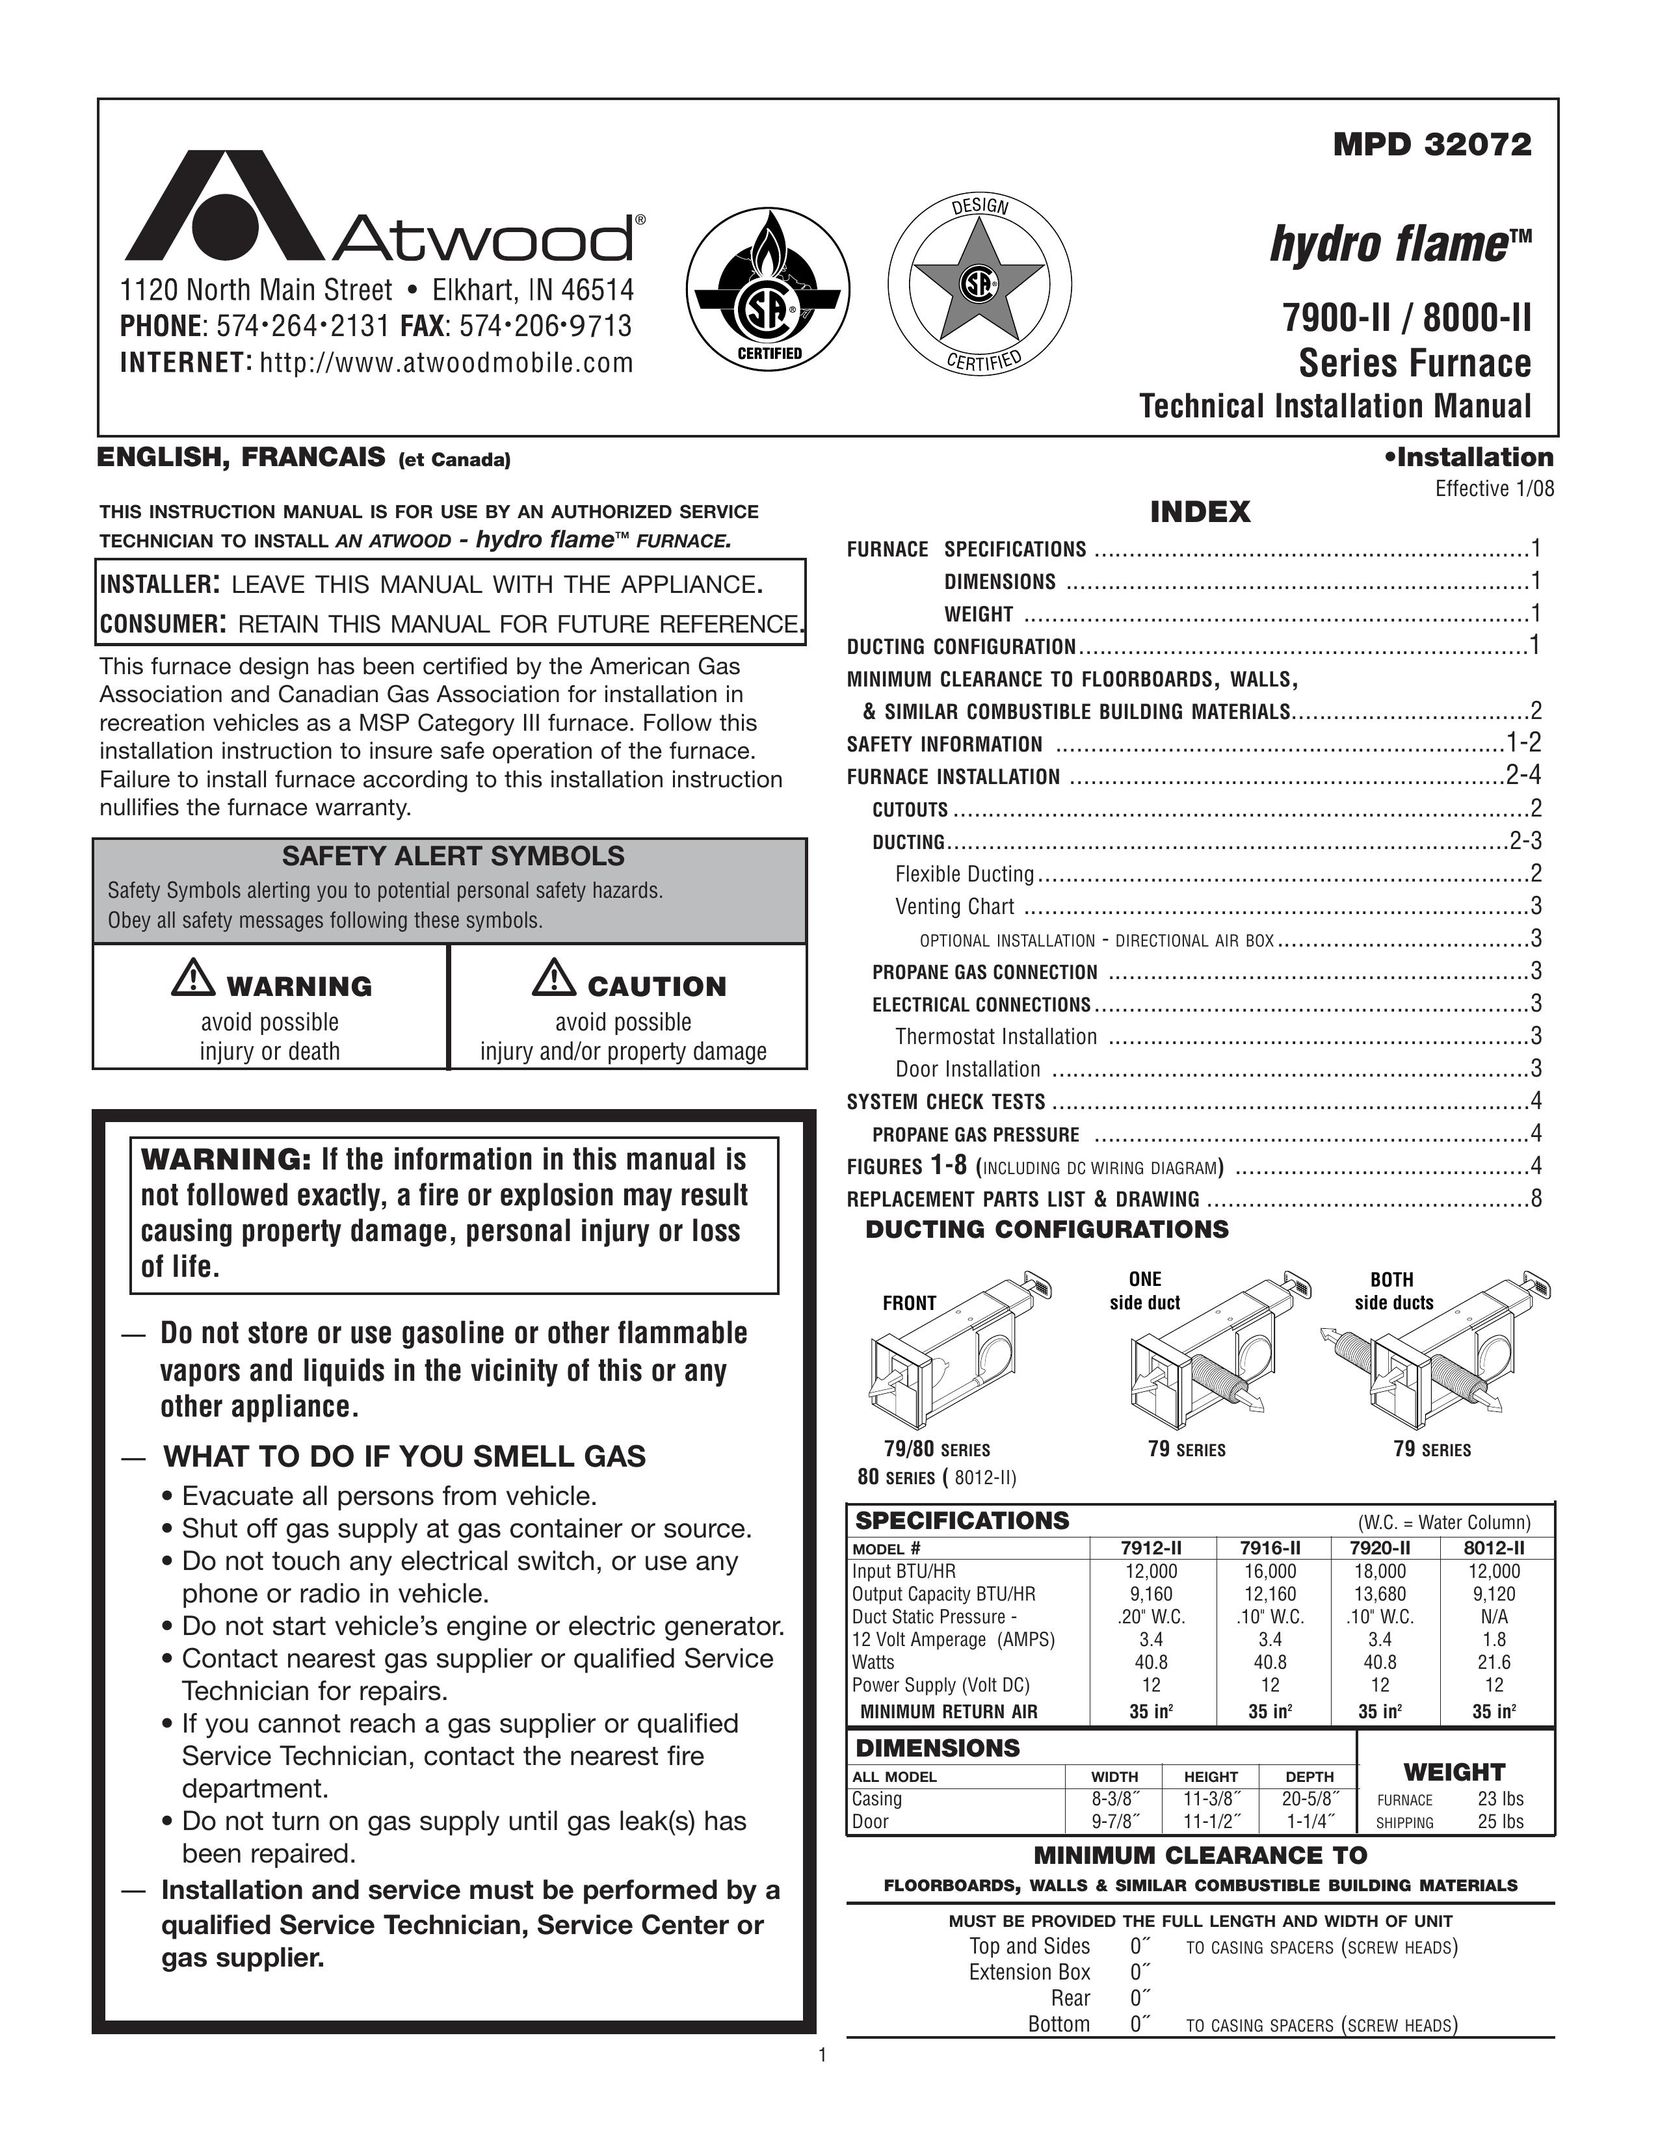 Atwood Mobile Products 7916-II Furnace User Manual